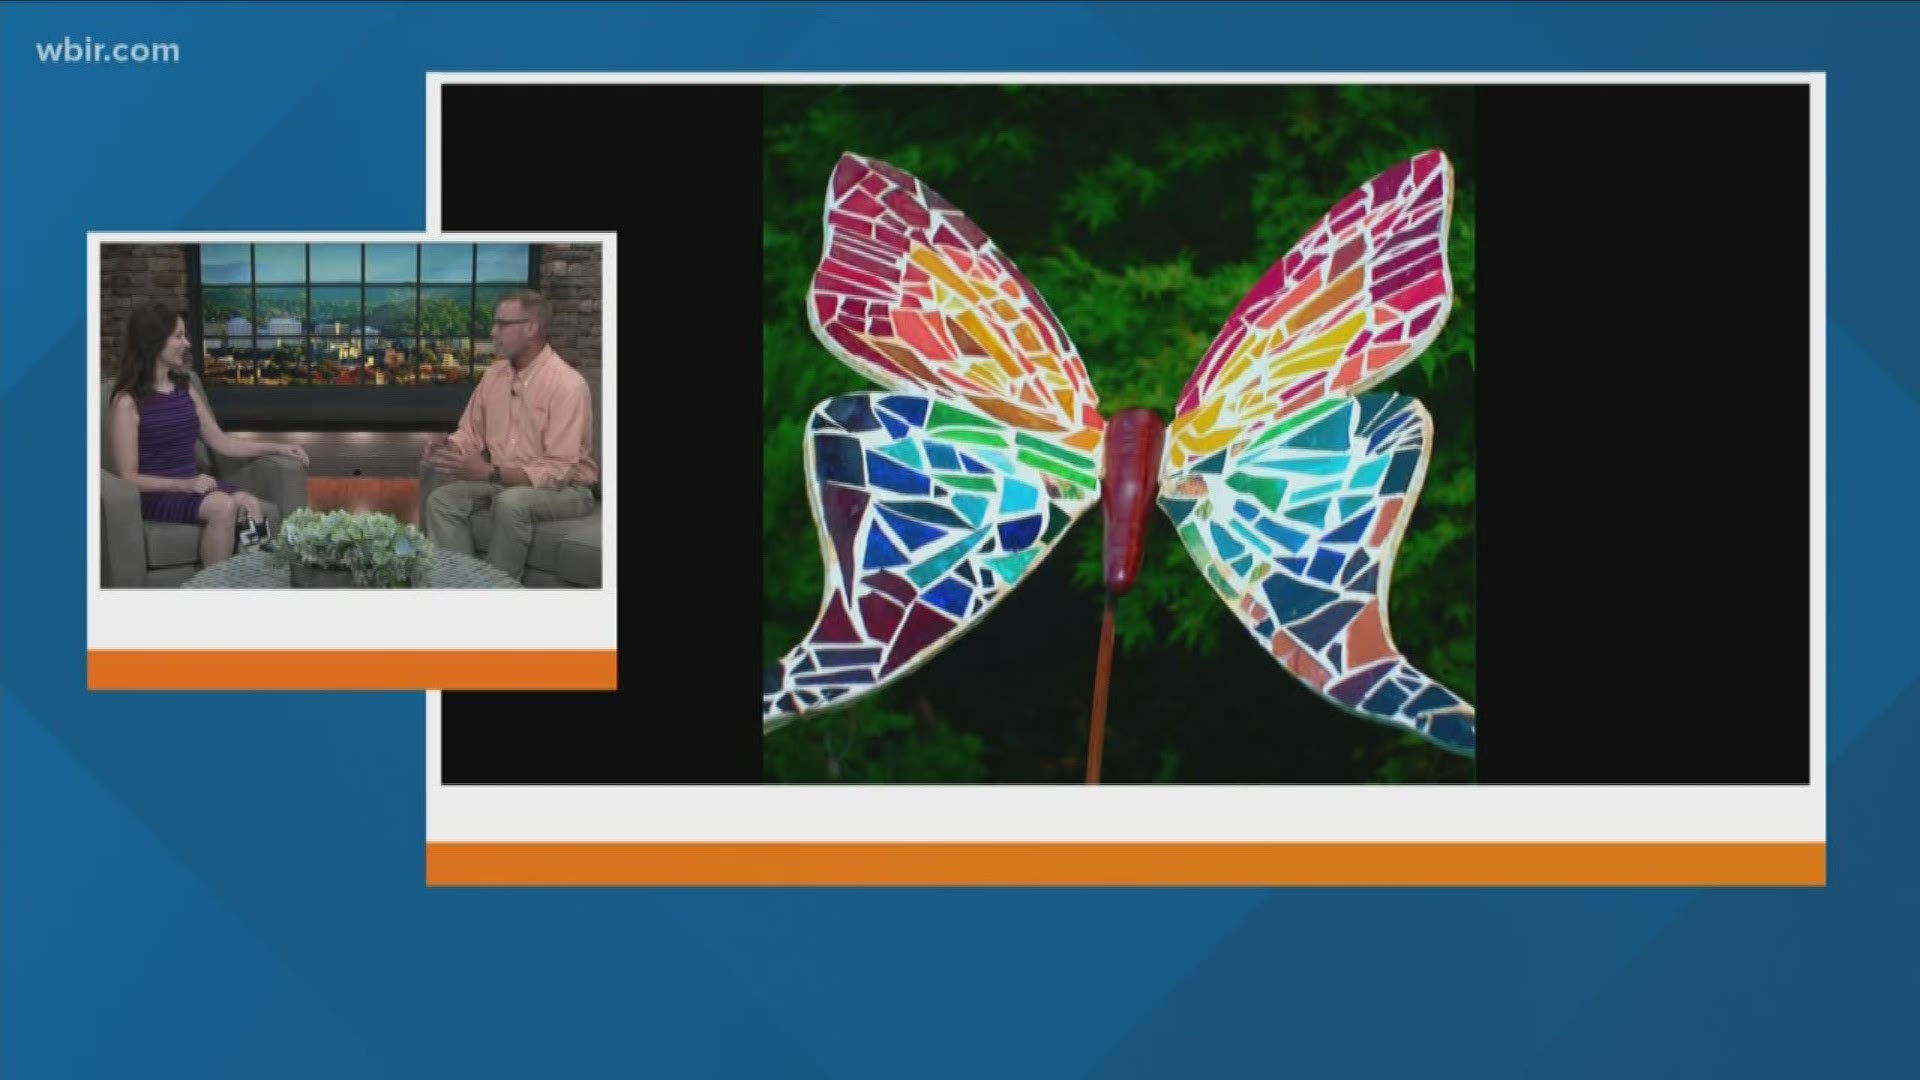 Next weekend, you'll have an opportunity to take home a part of UT Gardens to decorate your backyard. James Newburn was in the studio to talk about the Butterfly Art Auction.